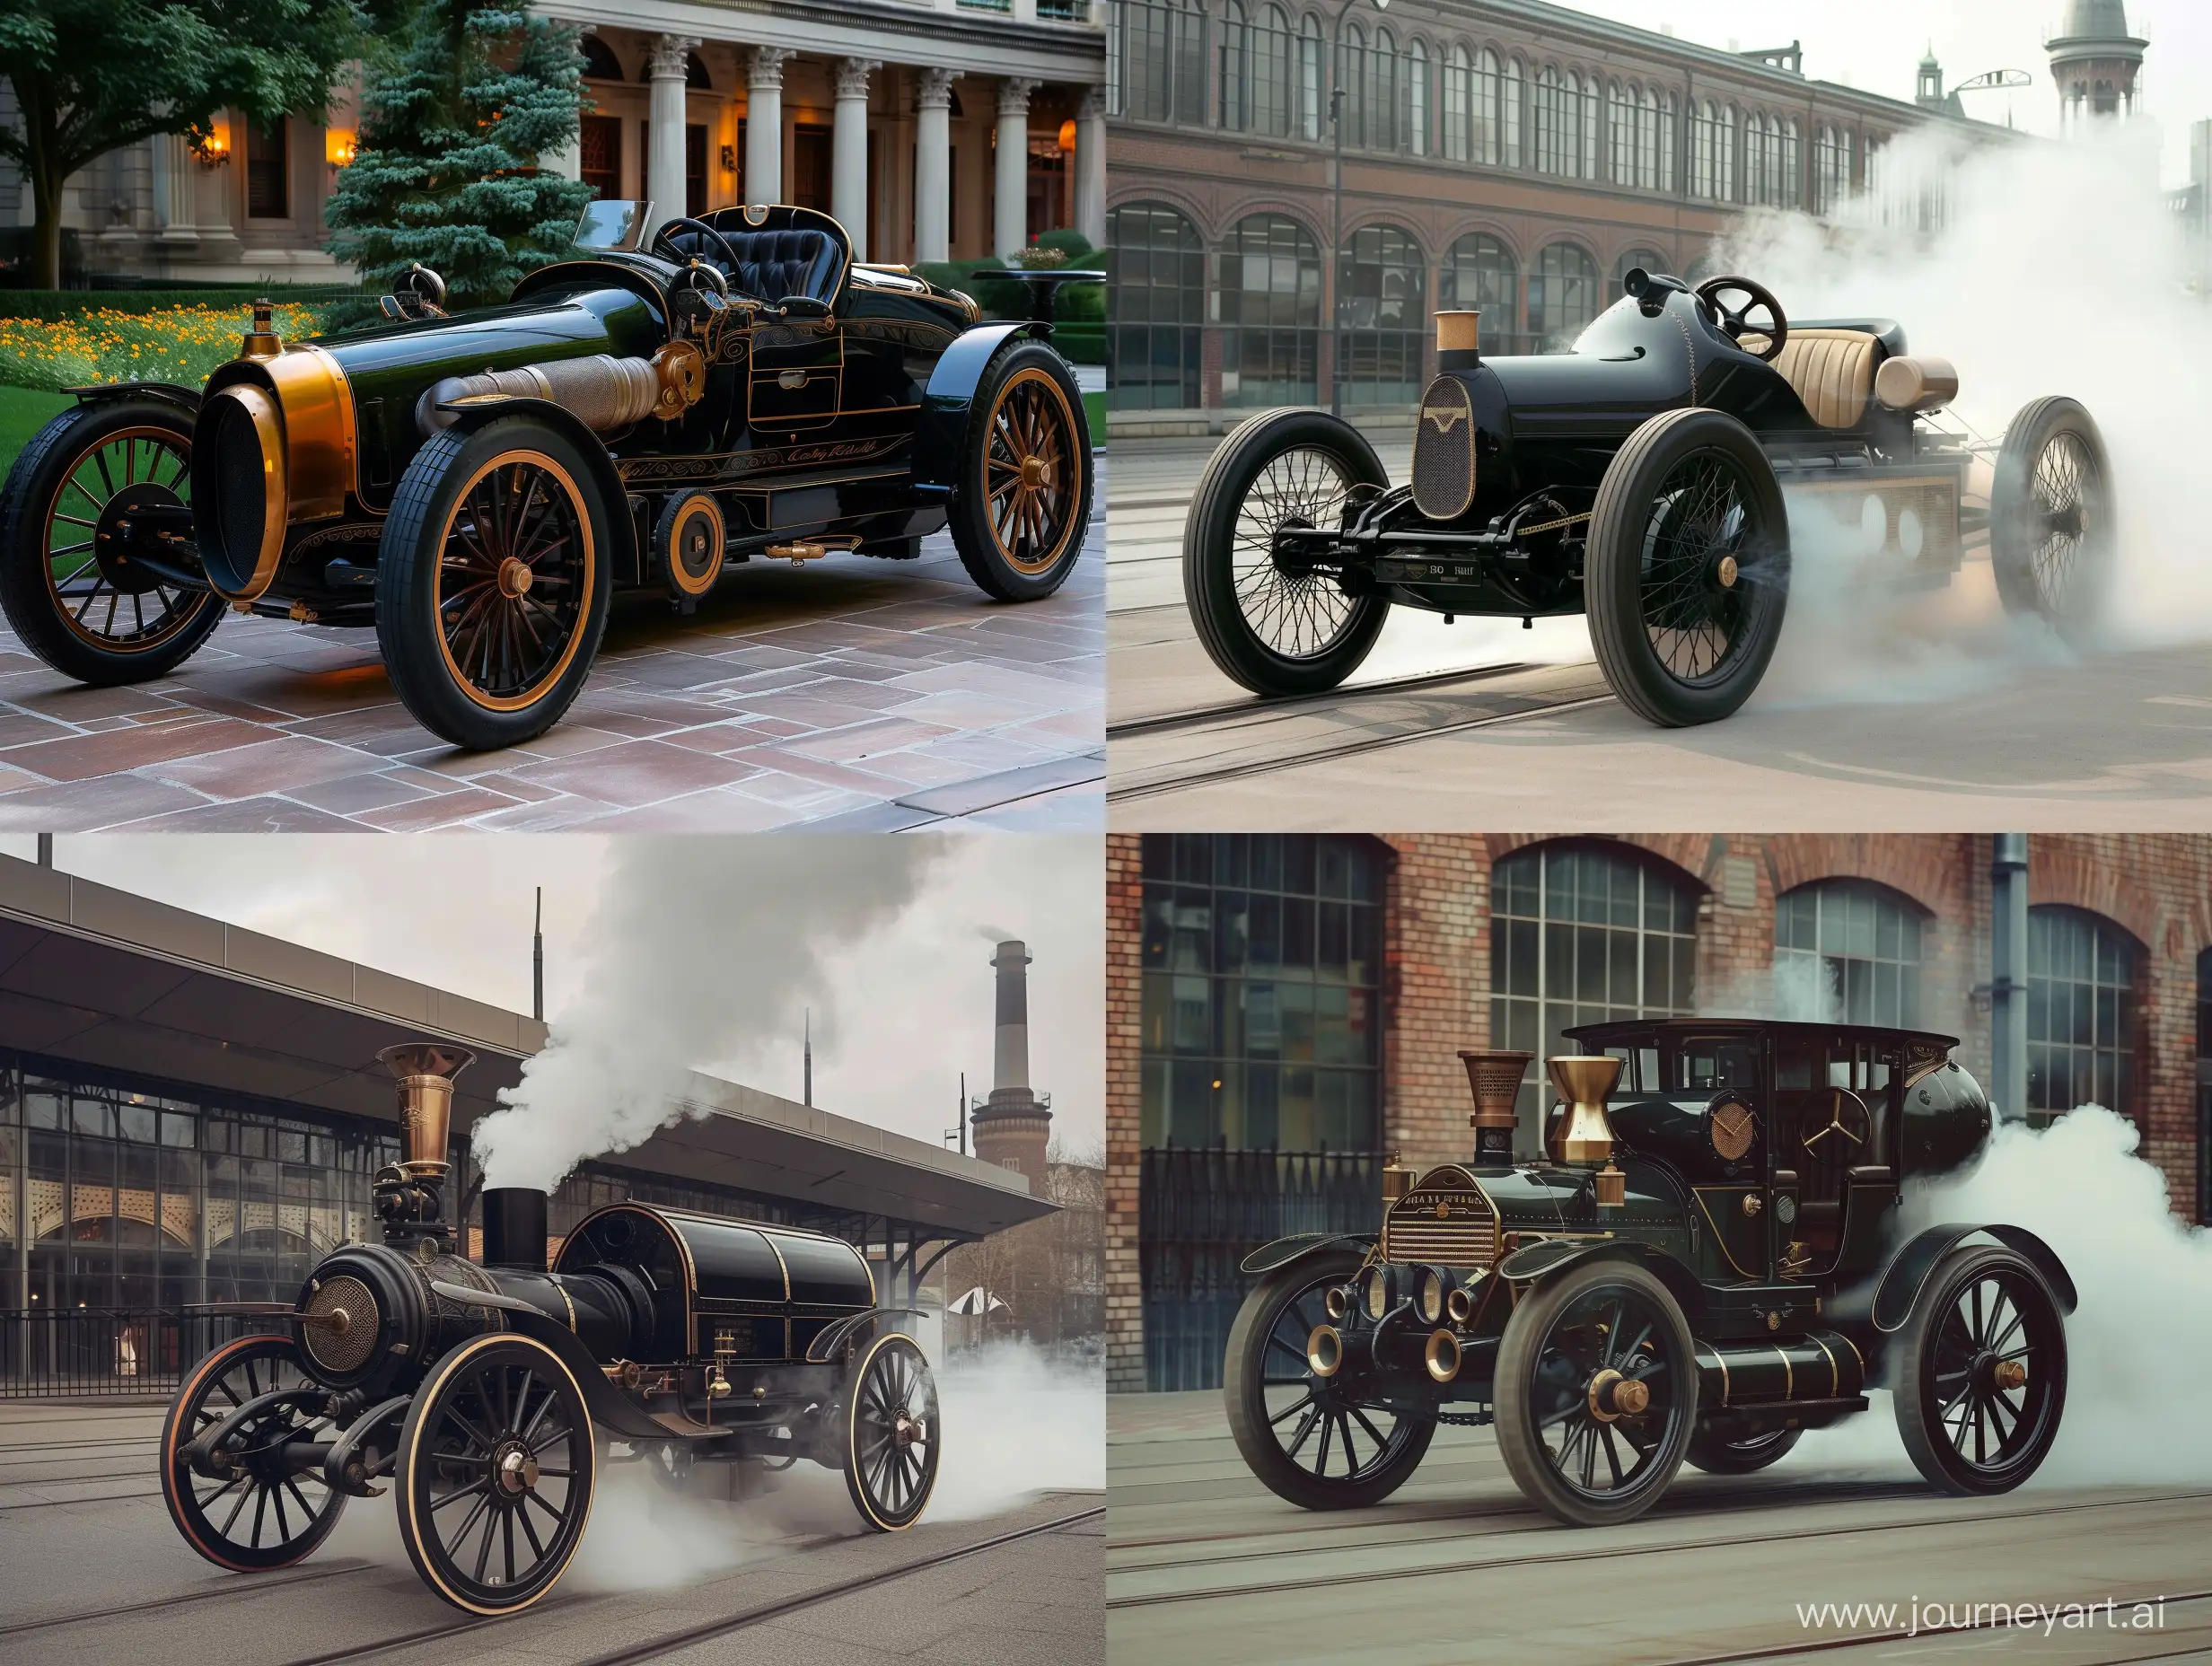 Vintage-SteamPowered-Car-and-Modern-Vehicle-Comparison